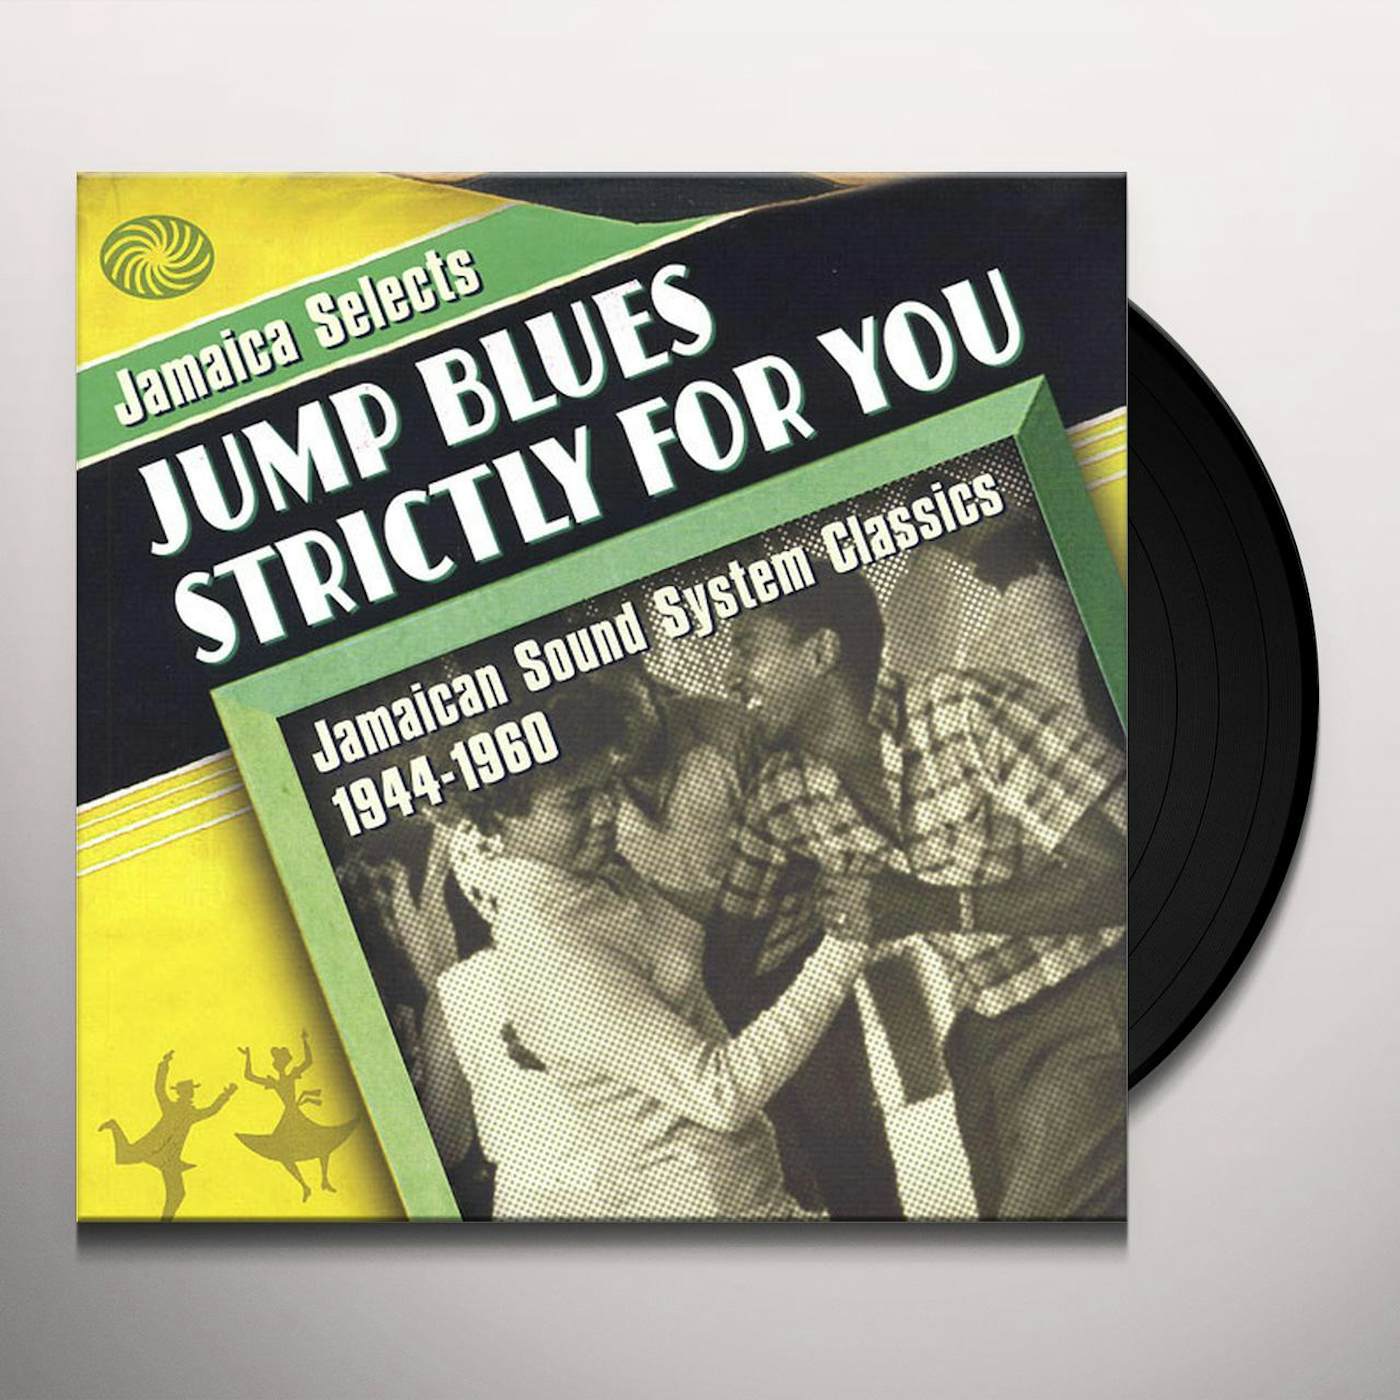 Jamaica Selects Jump Blues Strictly For You:Jamaic